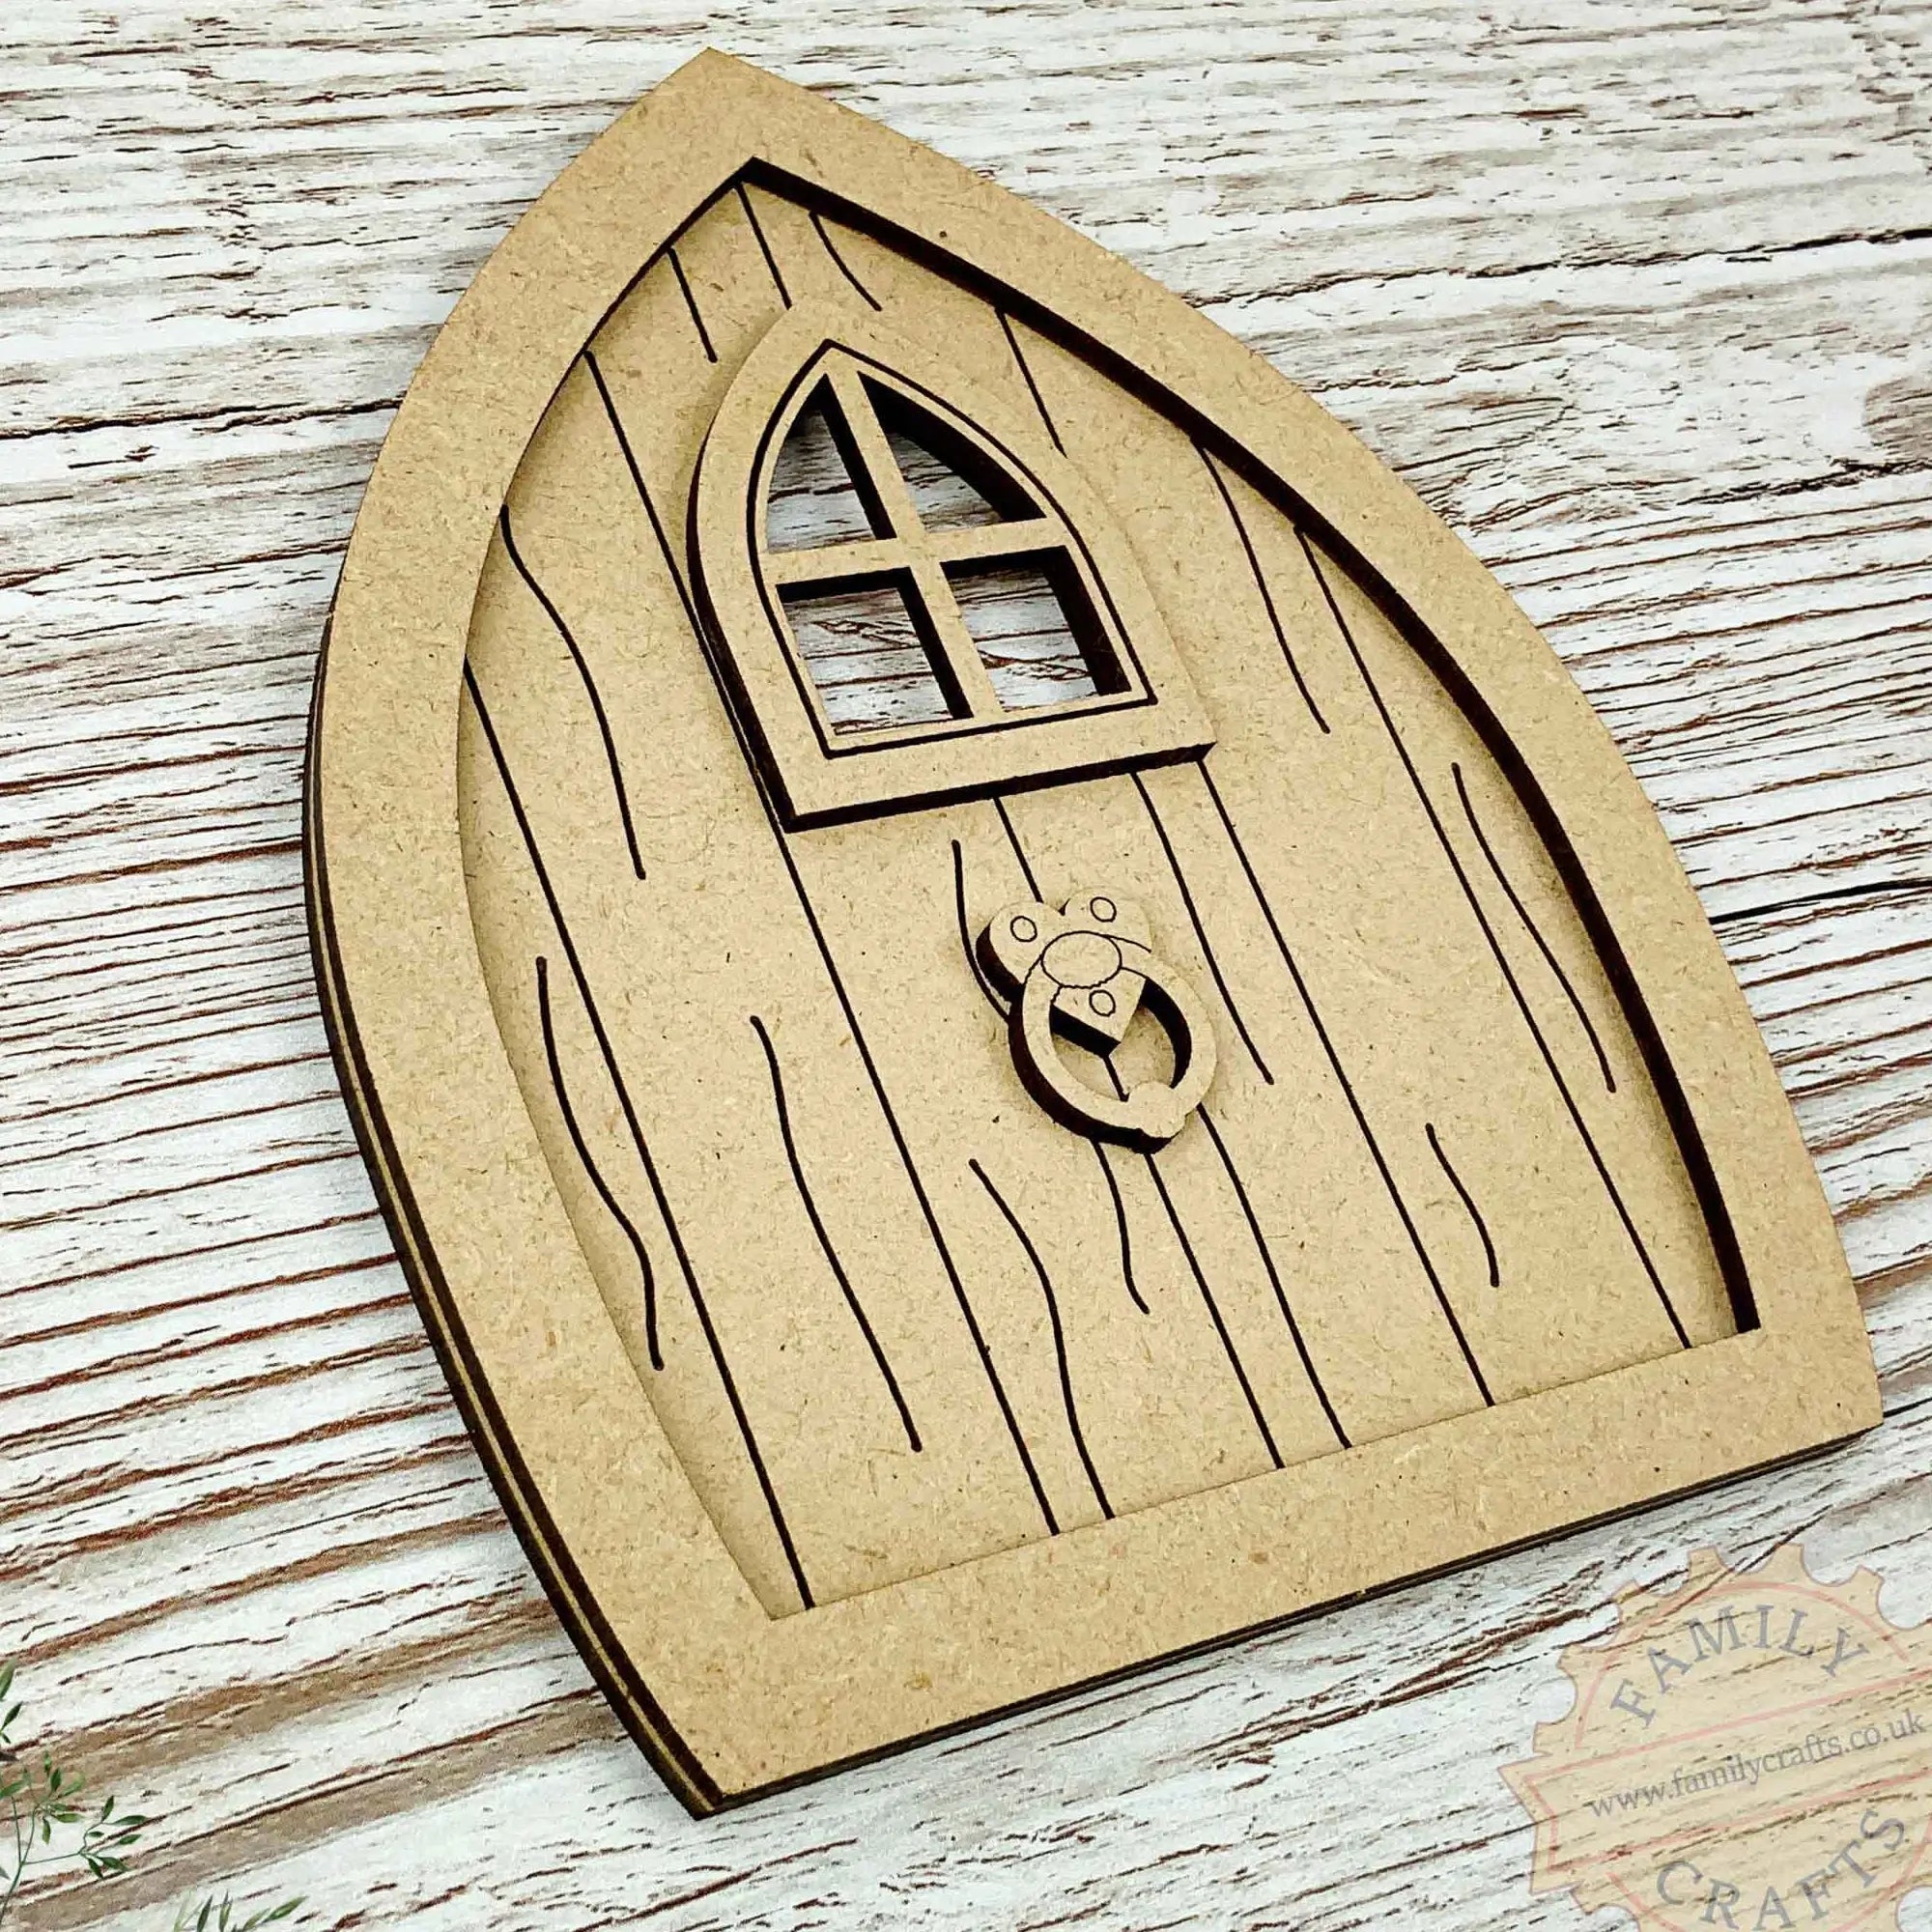 Pointed Layered Fairy Door Craft Kit with Woodgrain